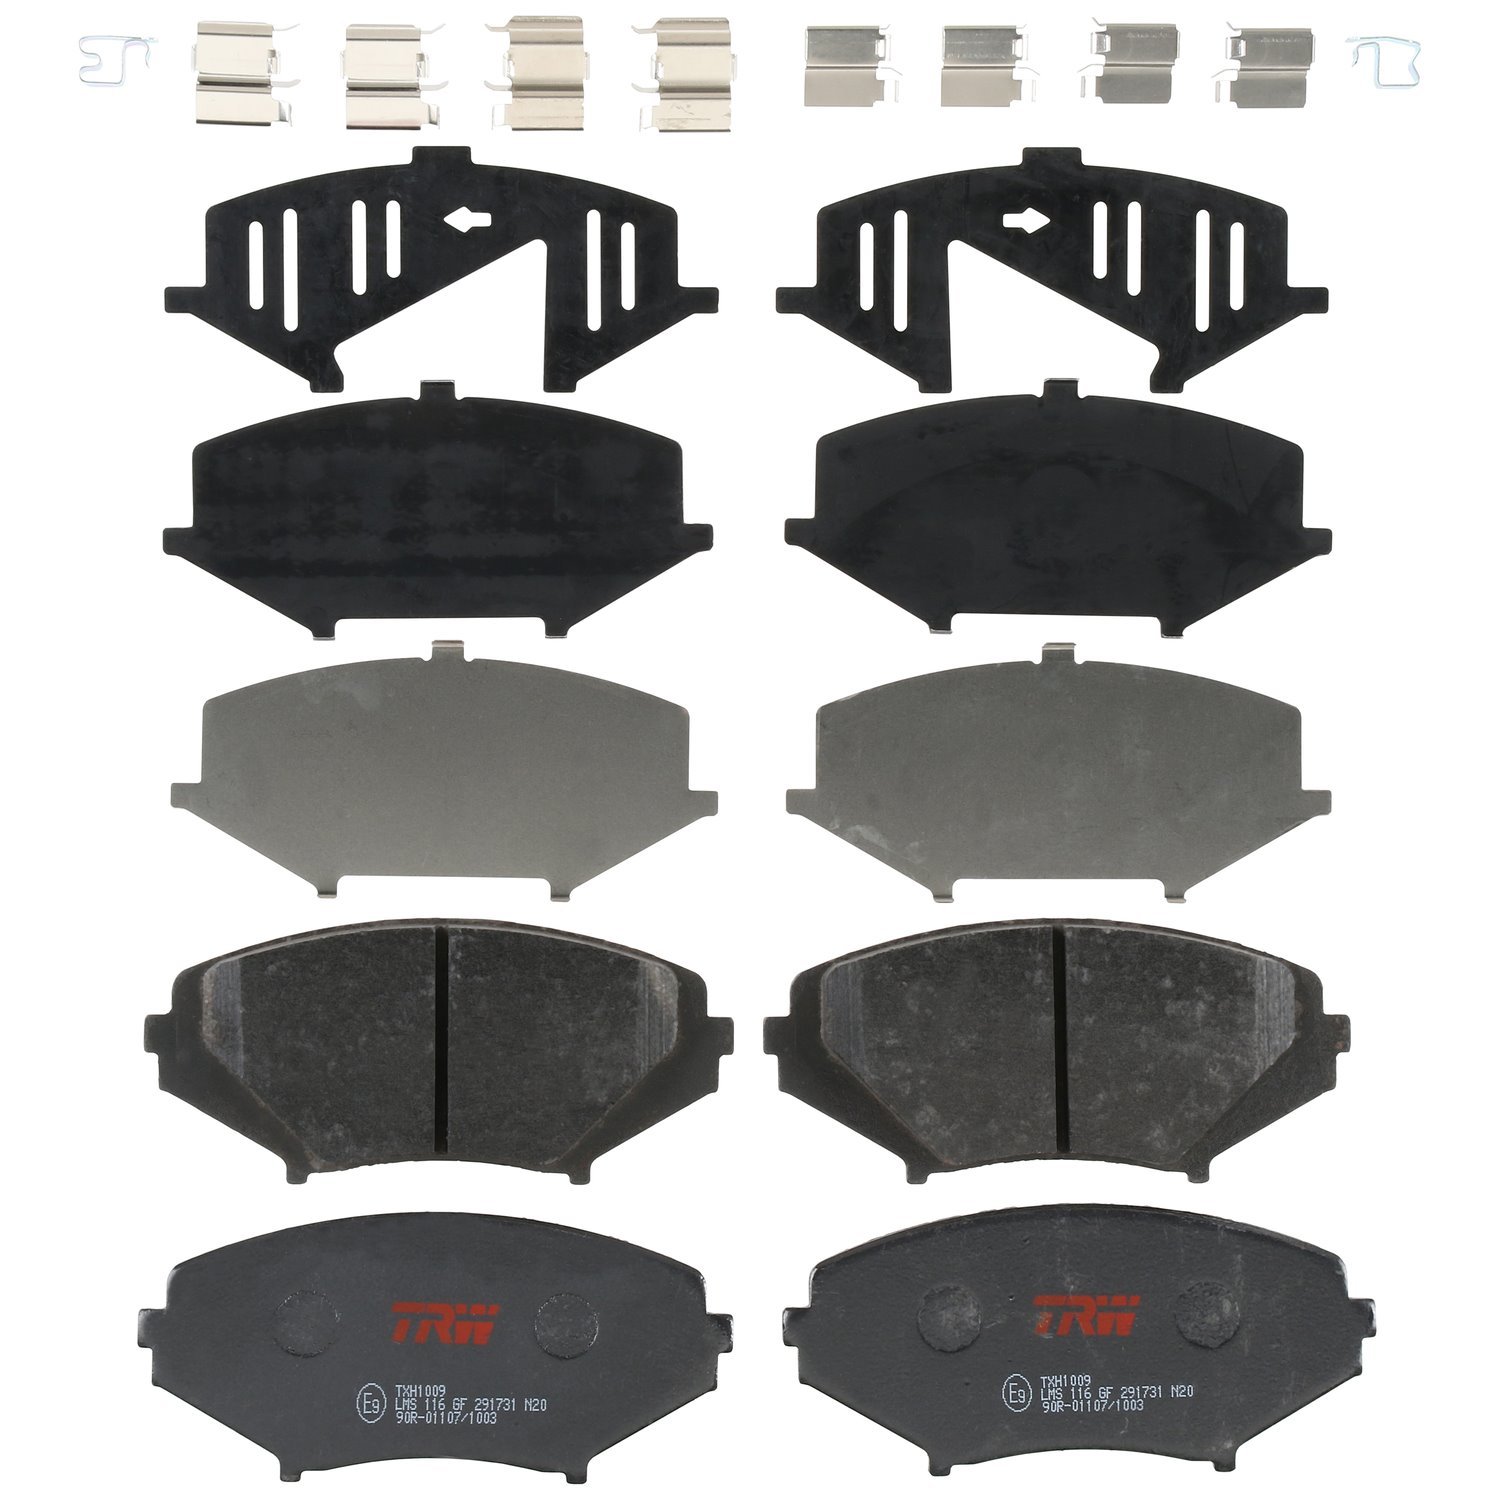 TXH1009 Ultra-Series Disc Brake Pad Set for Mazda RX-8 2011-2004, Position: Front